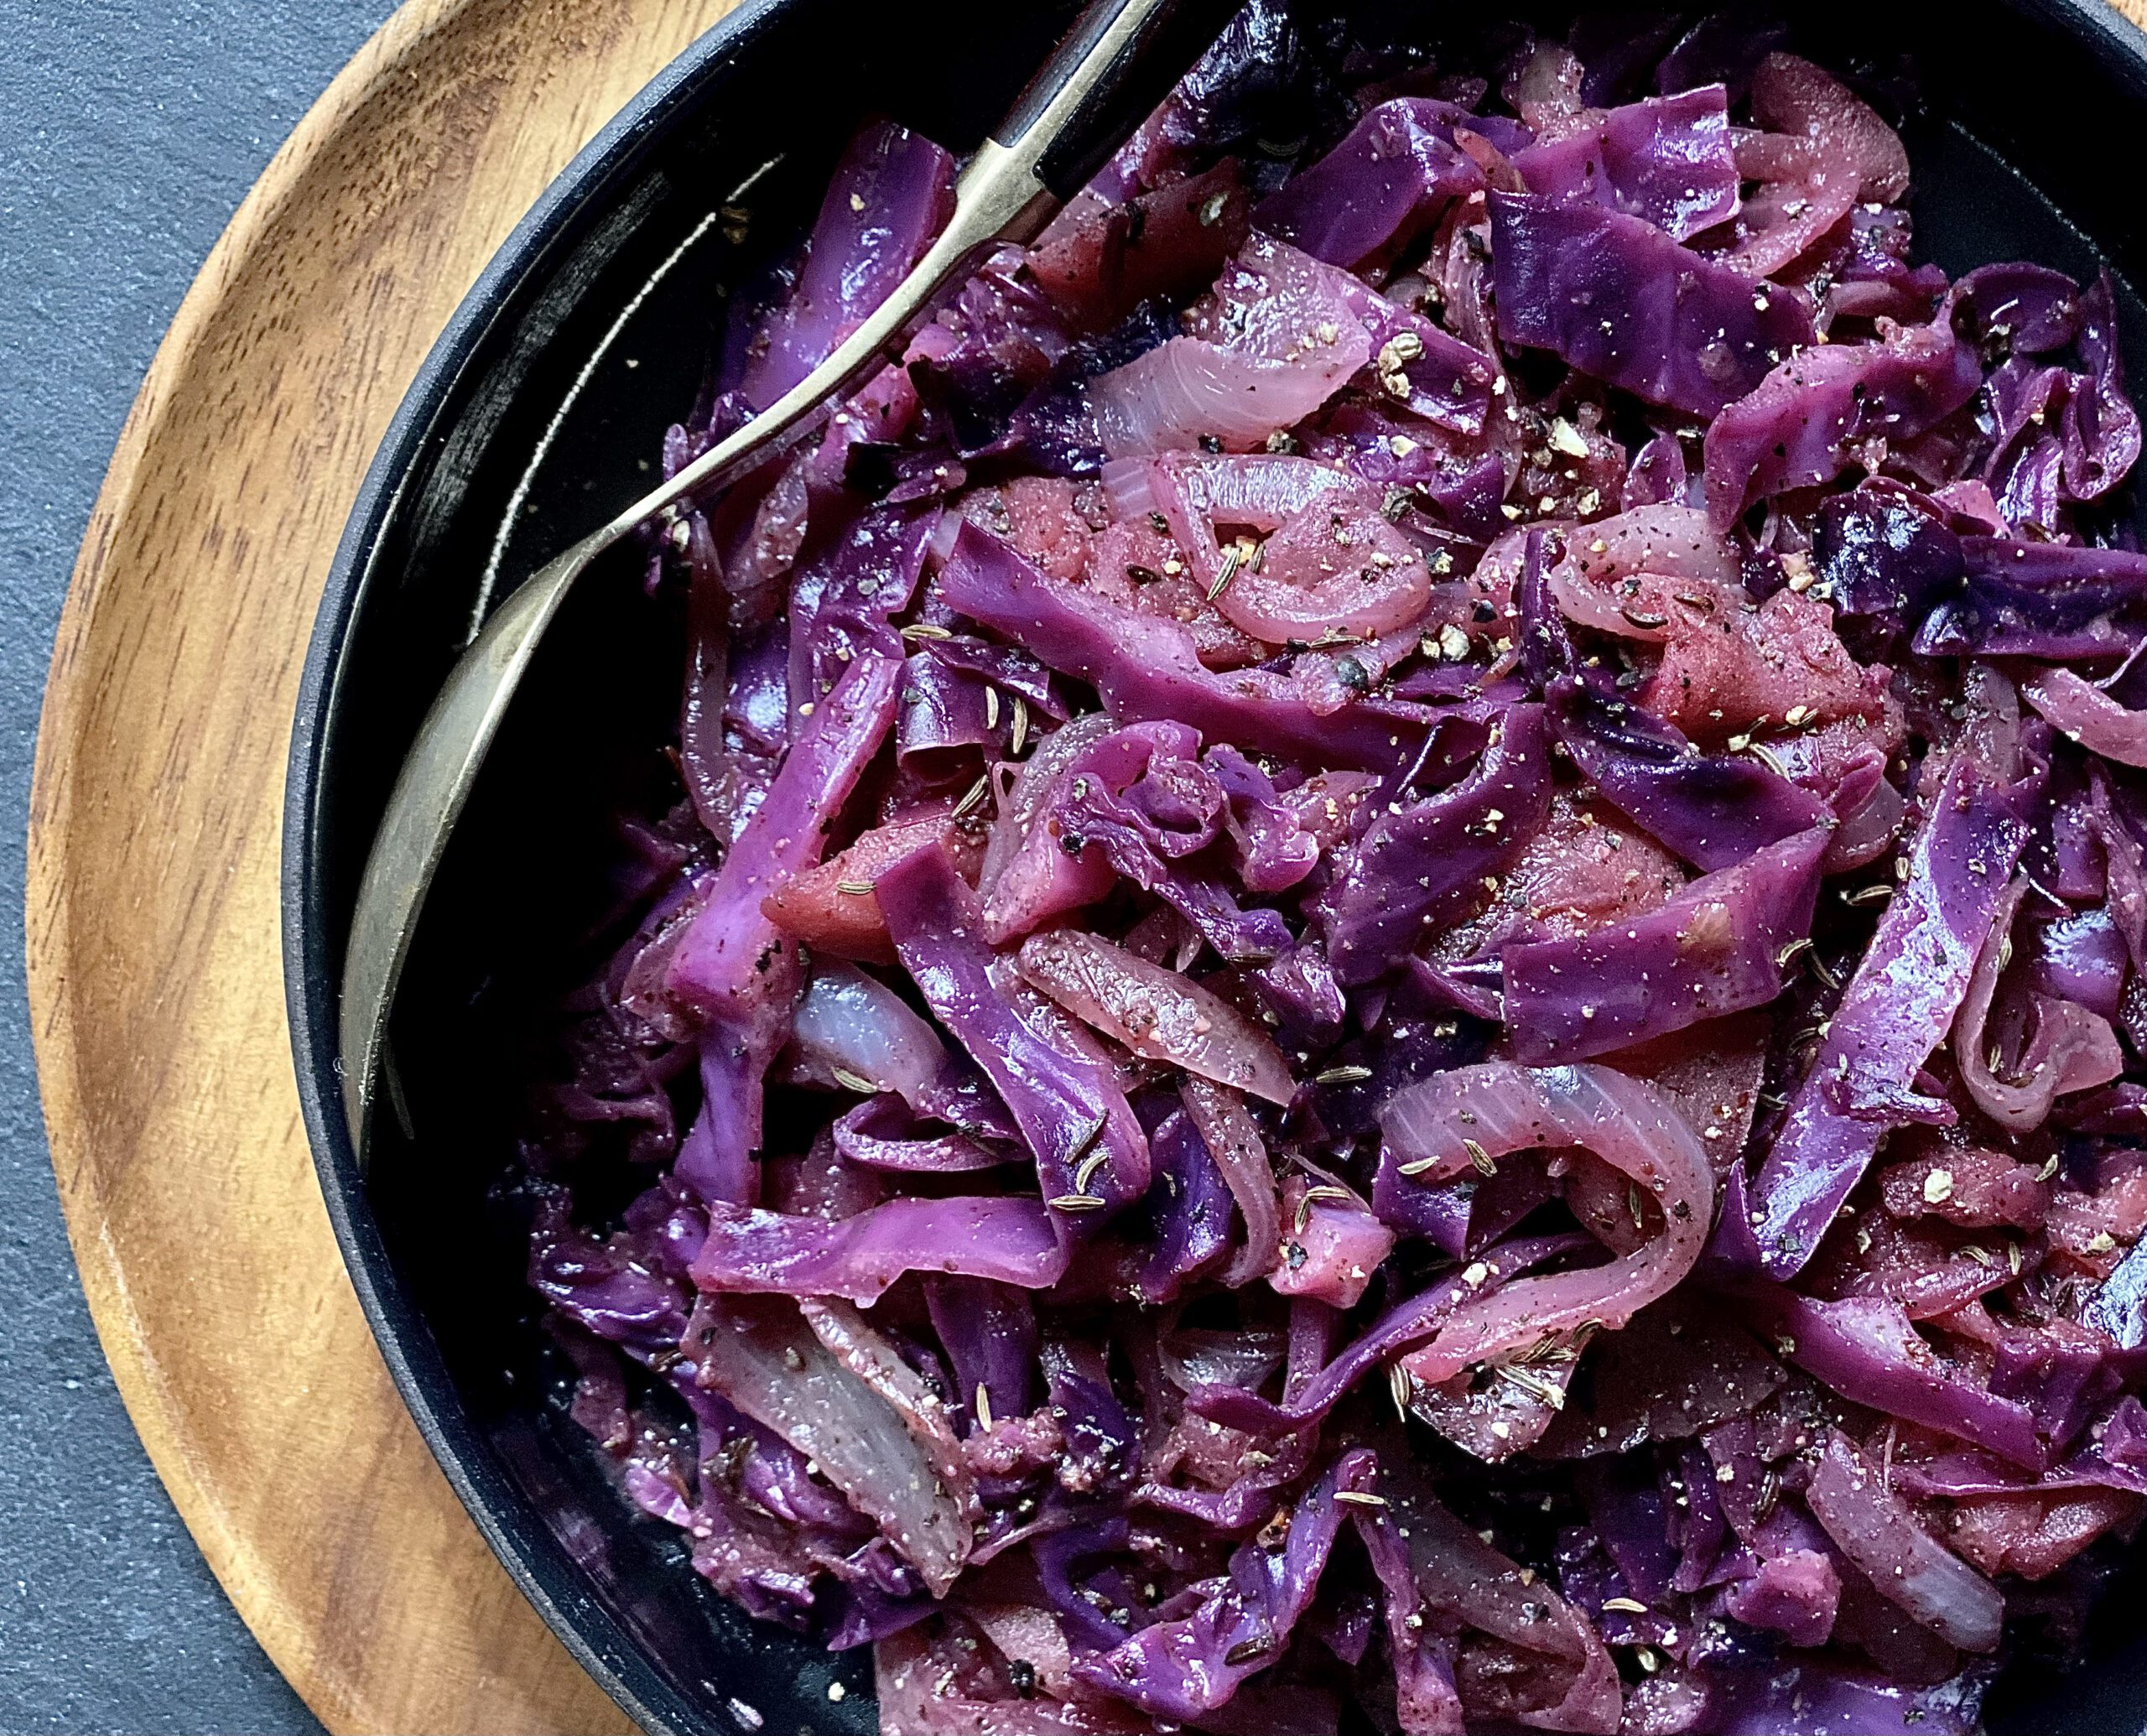 An image showcasing a bowl of braised red cabbage. The cabbage appears tender and slightly wilted, infused with savory spices and aromatics. Specks of seasoning and herbs are visible throughout the dish, adding depth to its appearance.